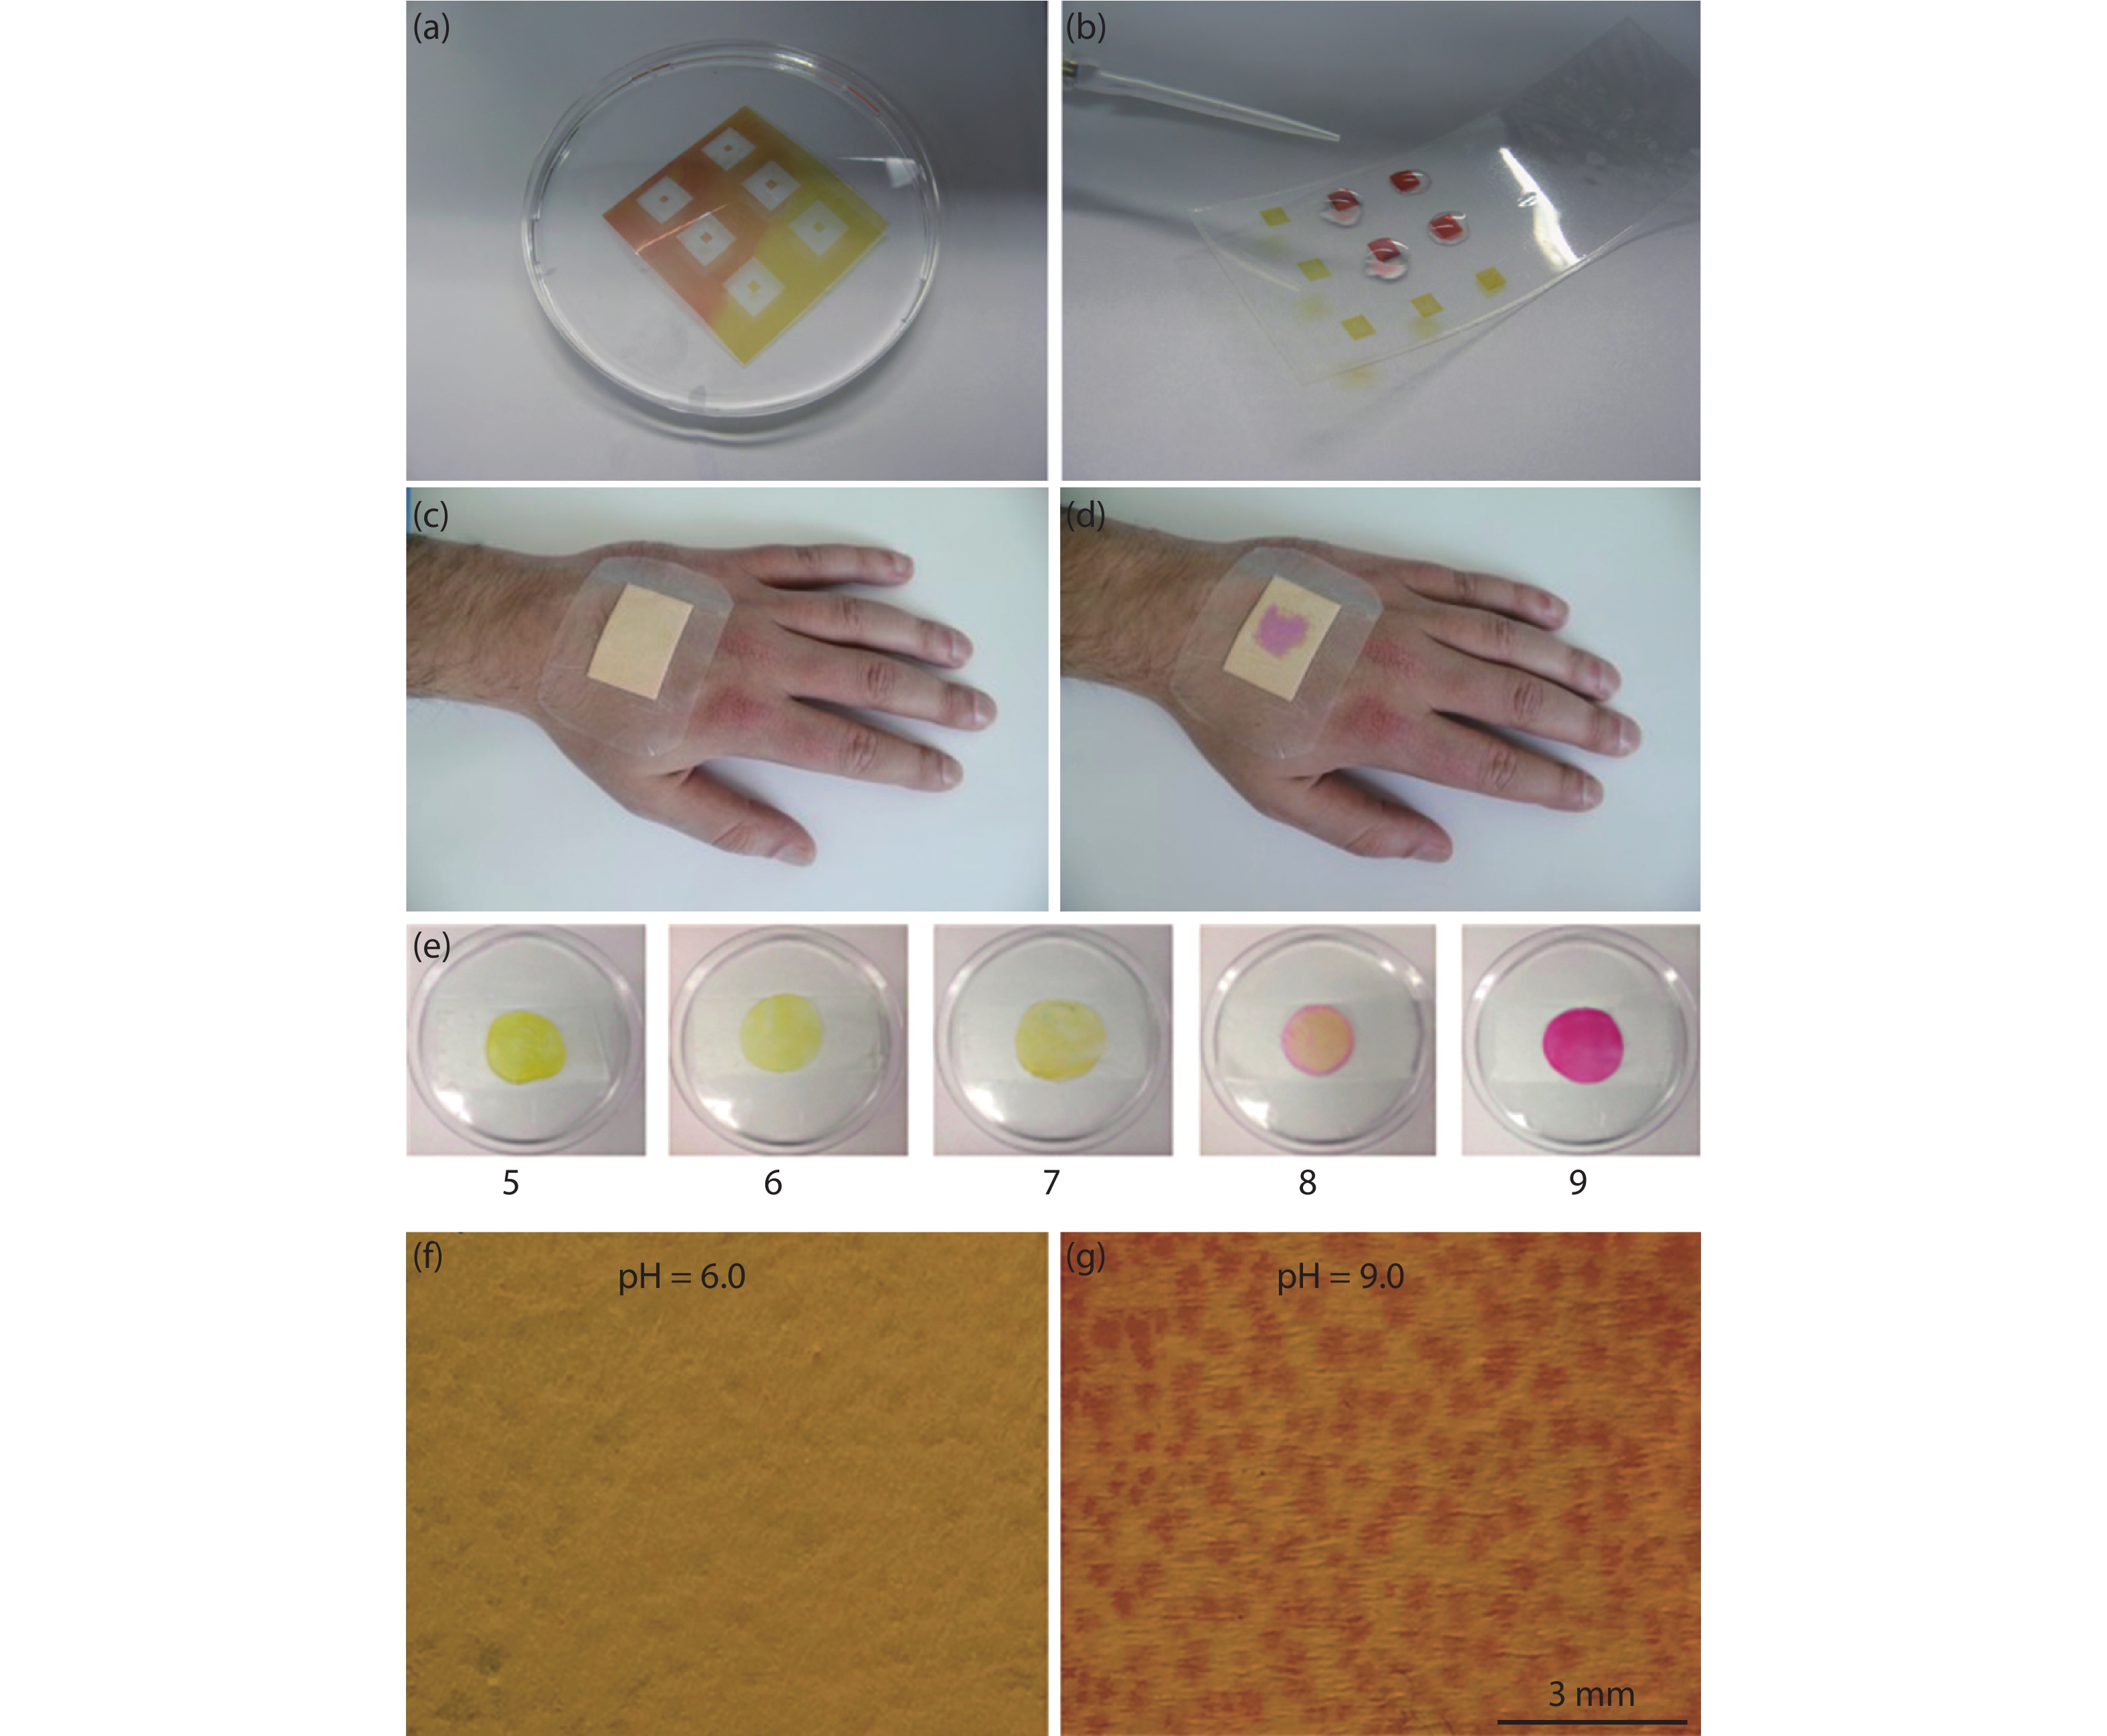 (Color online) (a) Flexible array-type pH sensor. (b) Color change on the pH from acidic to basic[36]. (c) The flexible pH sensor can be fixed on the skin, and (d) change color when the pH varied[37]. (e) Photographic images of the hydrogel patch under pH values from 5 to 9. (f) and (g) Electrospun PCL-curcumin nanofibers under pH 6 and 9[49].